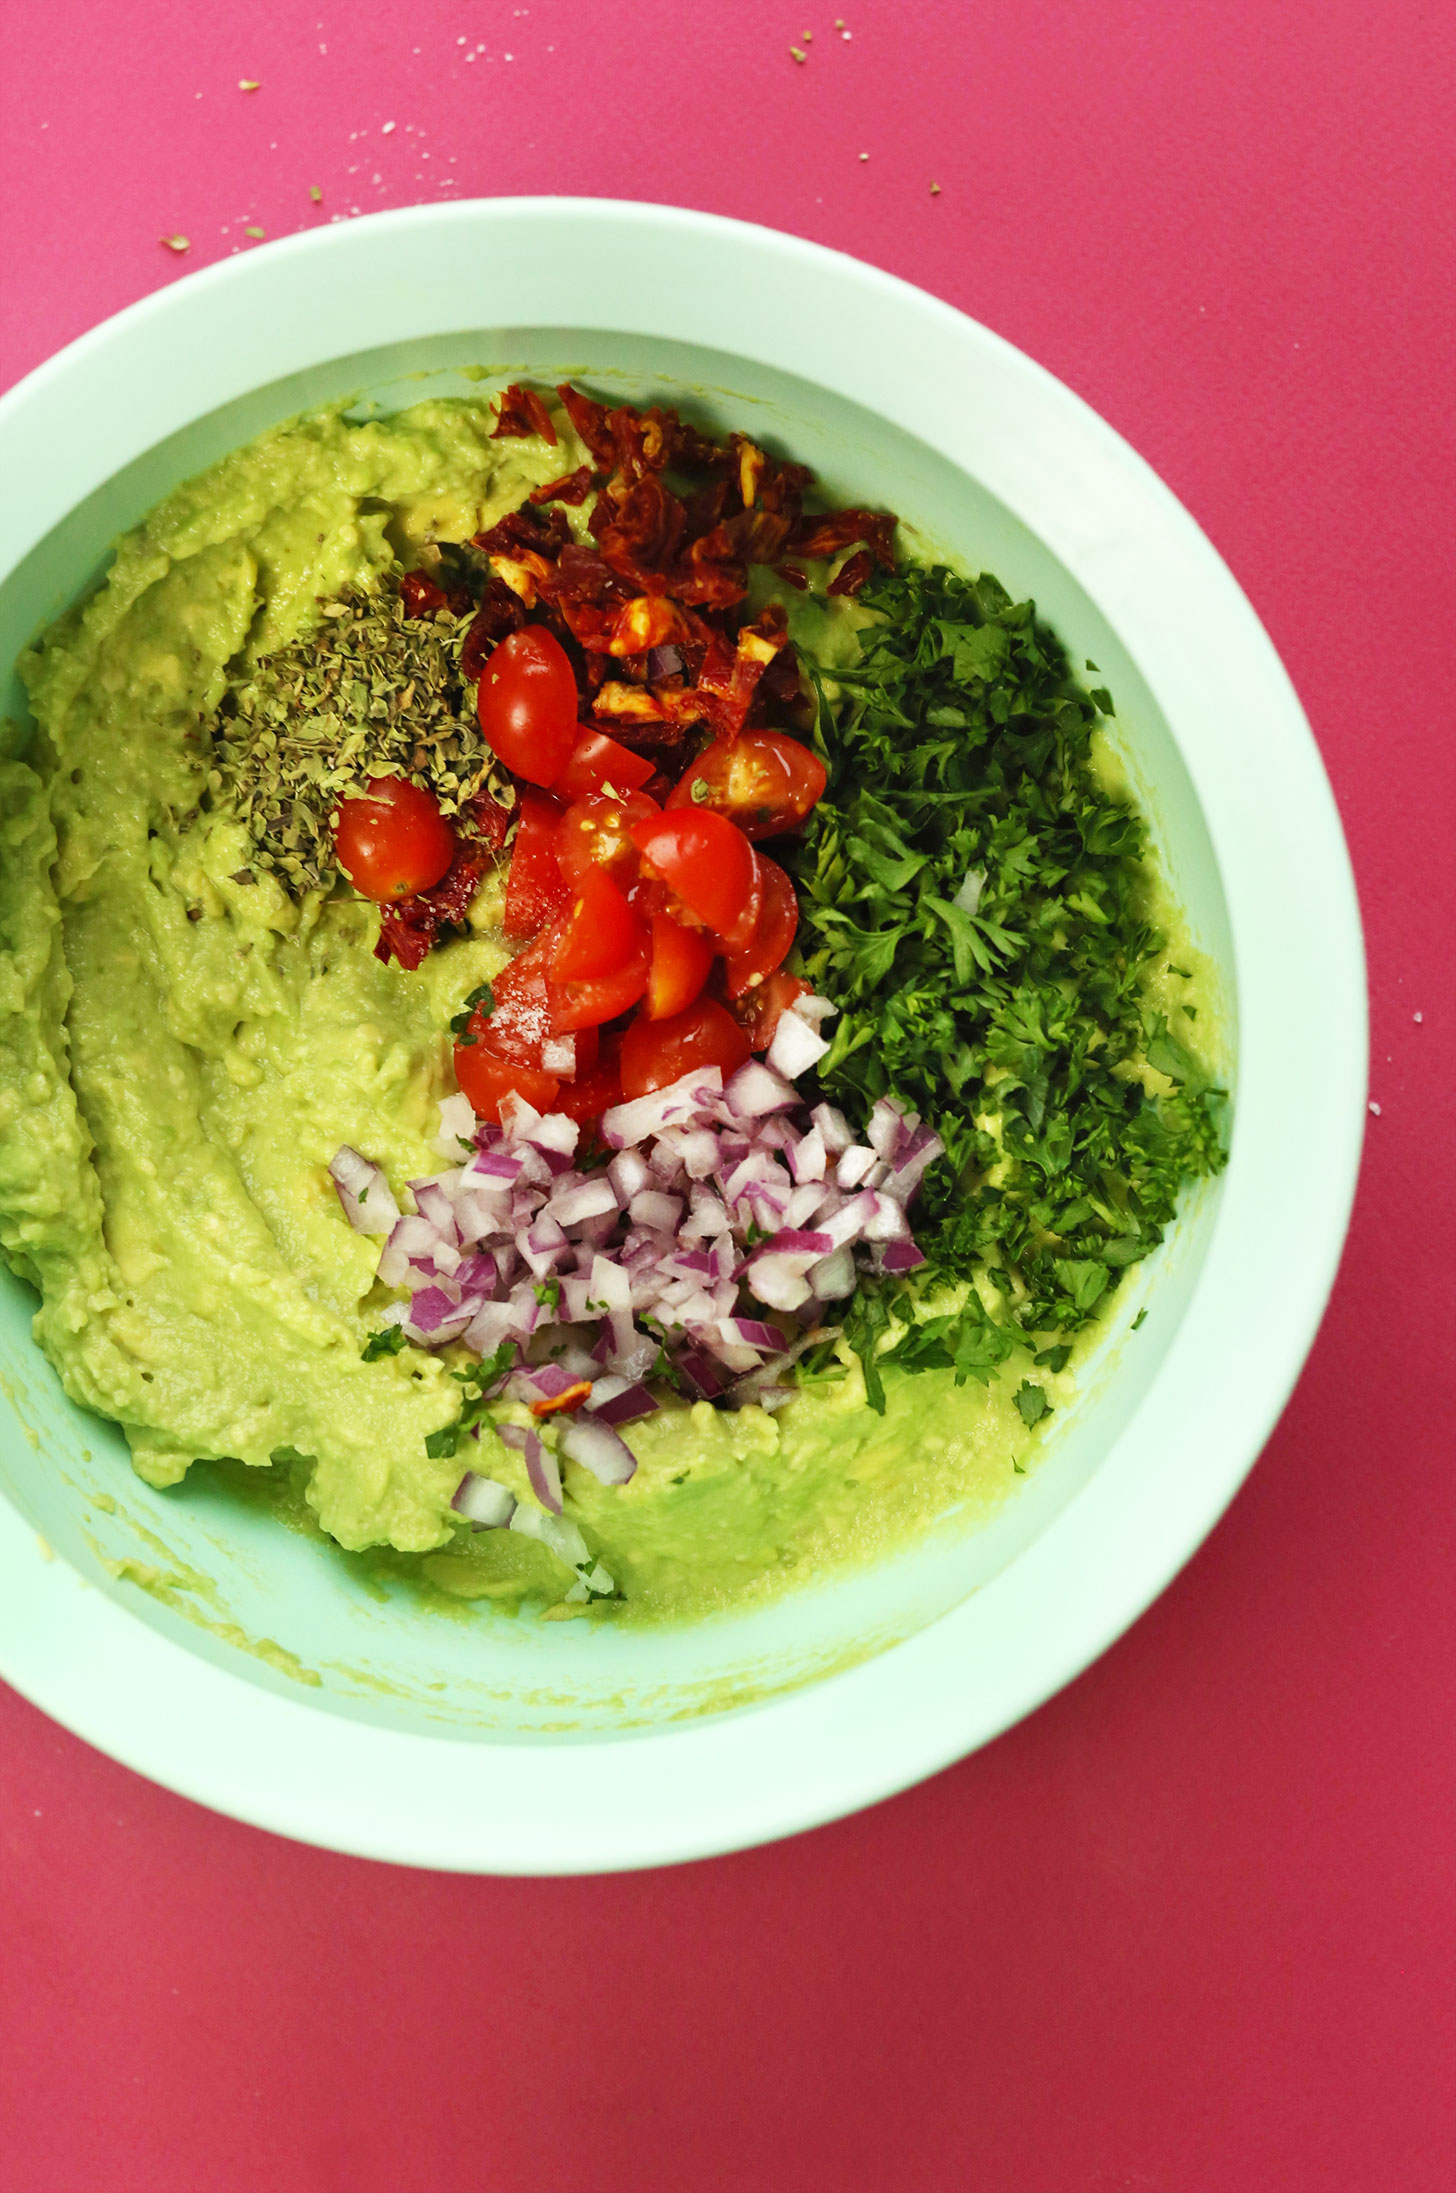 Big bowl of our healthy homemade Greek-Inspired Guacamole for a delicious vegan snack